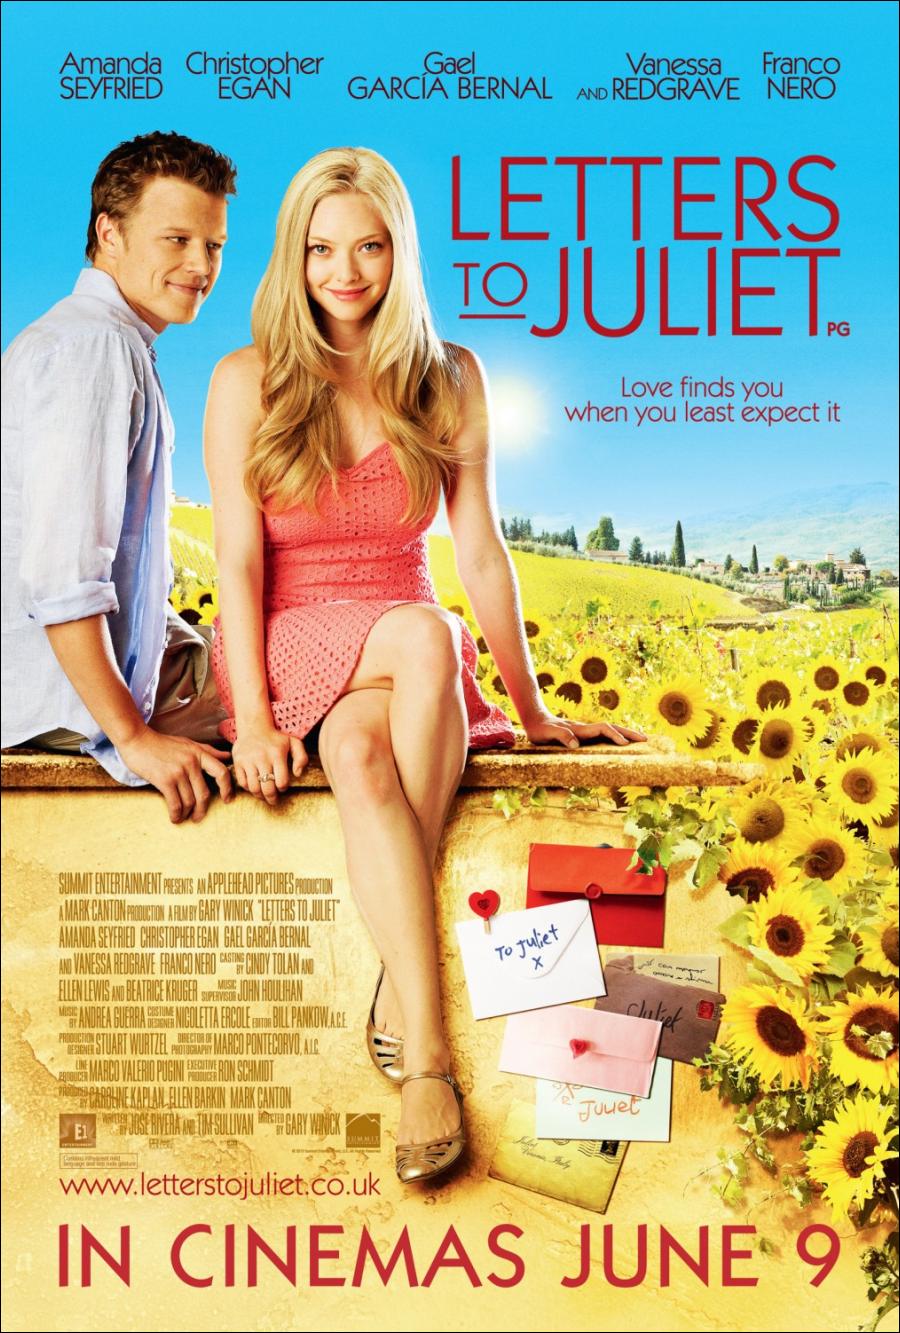 Amanda Seyfried - Letters to Juliet Double Sided Poster